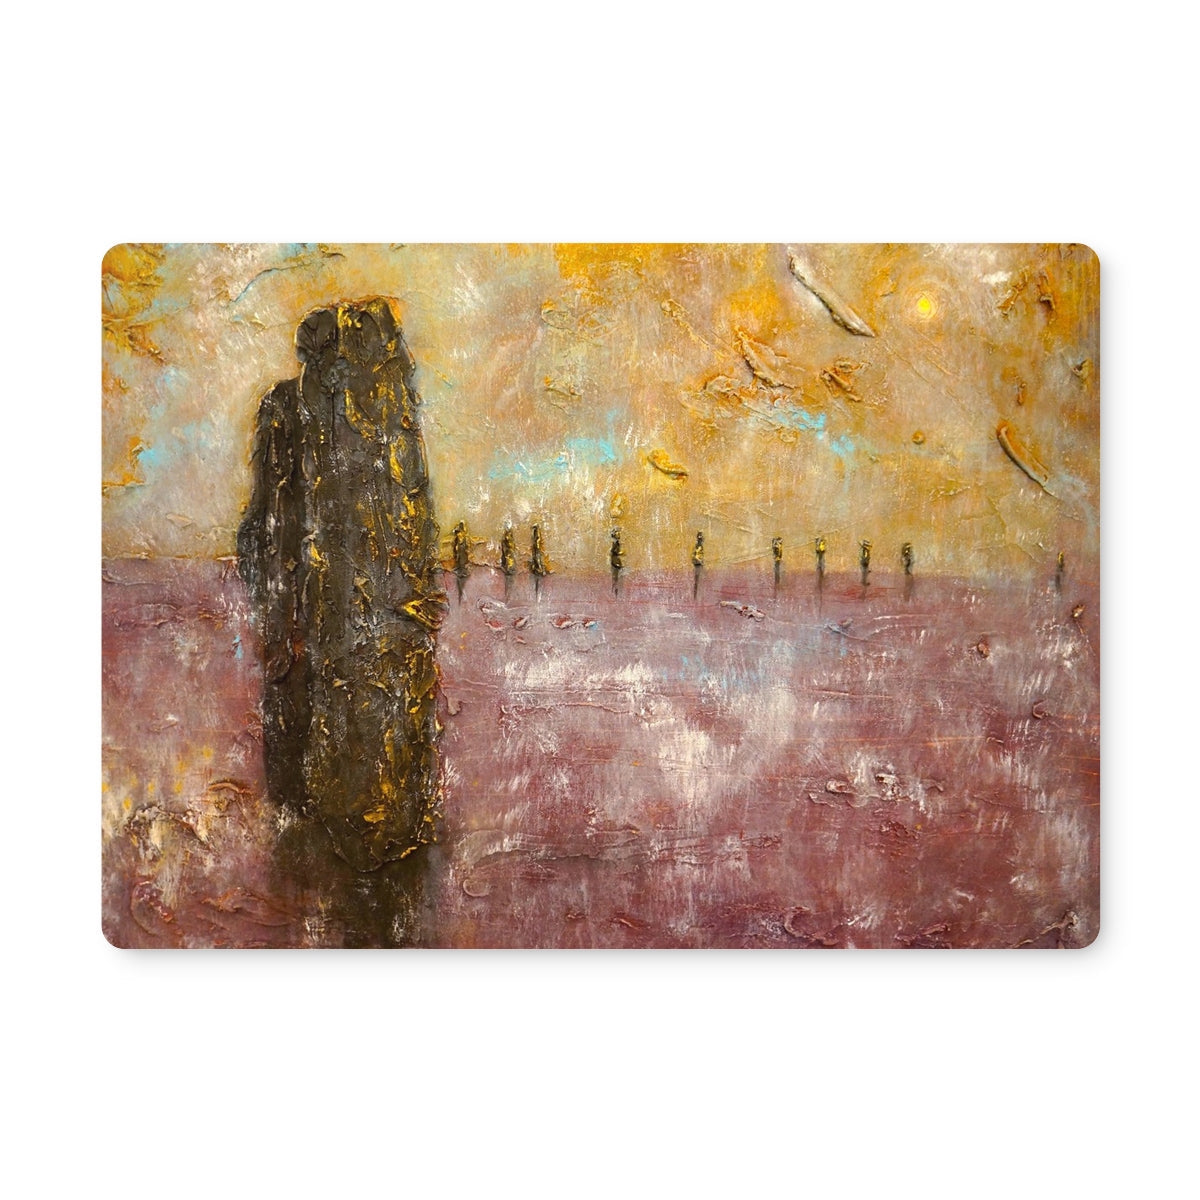 Brodgar Mist Orkney Art Gifts Placemat-Placemats-Orkney Art Gallery-4 Placemats-Paintings, Prints, Homeware, Art Gifts From Scotland By Scottish Artist Kevin Hunter